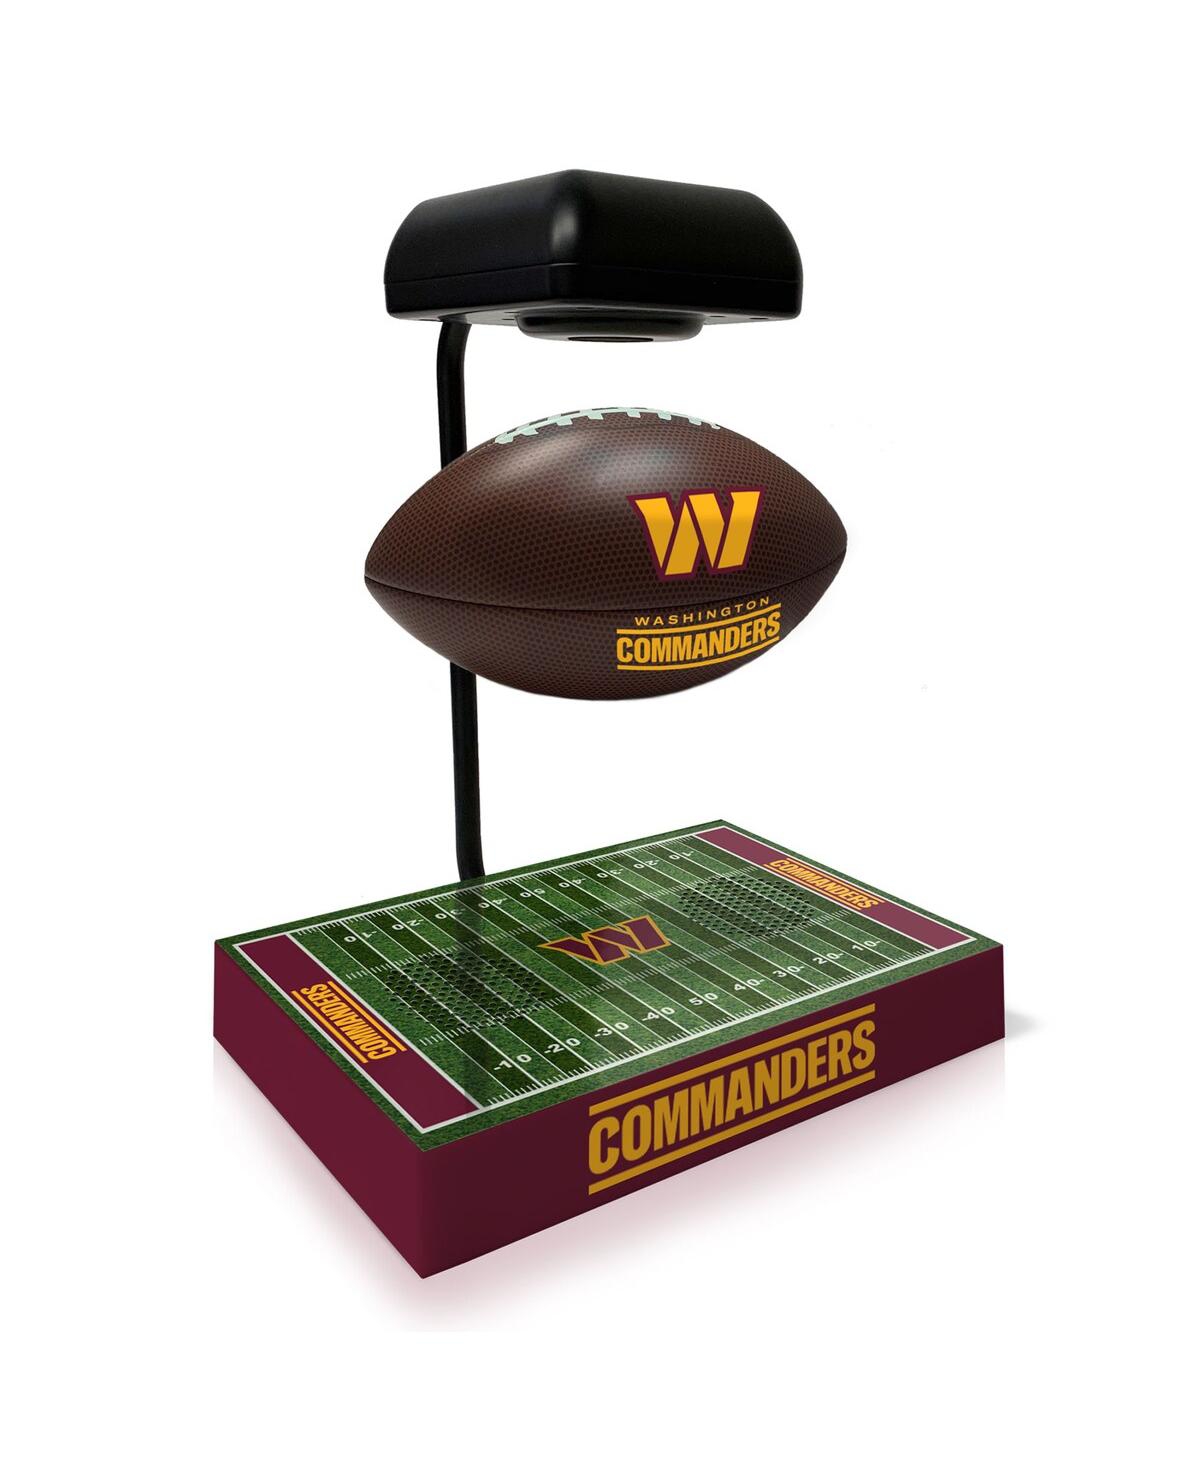 Pegasus Home Fashions Washington Commanders Hover Football With Bluetooth Speaker In Multi